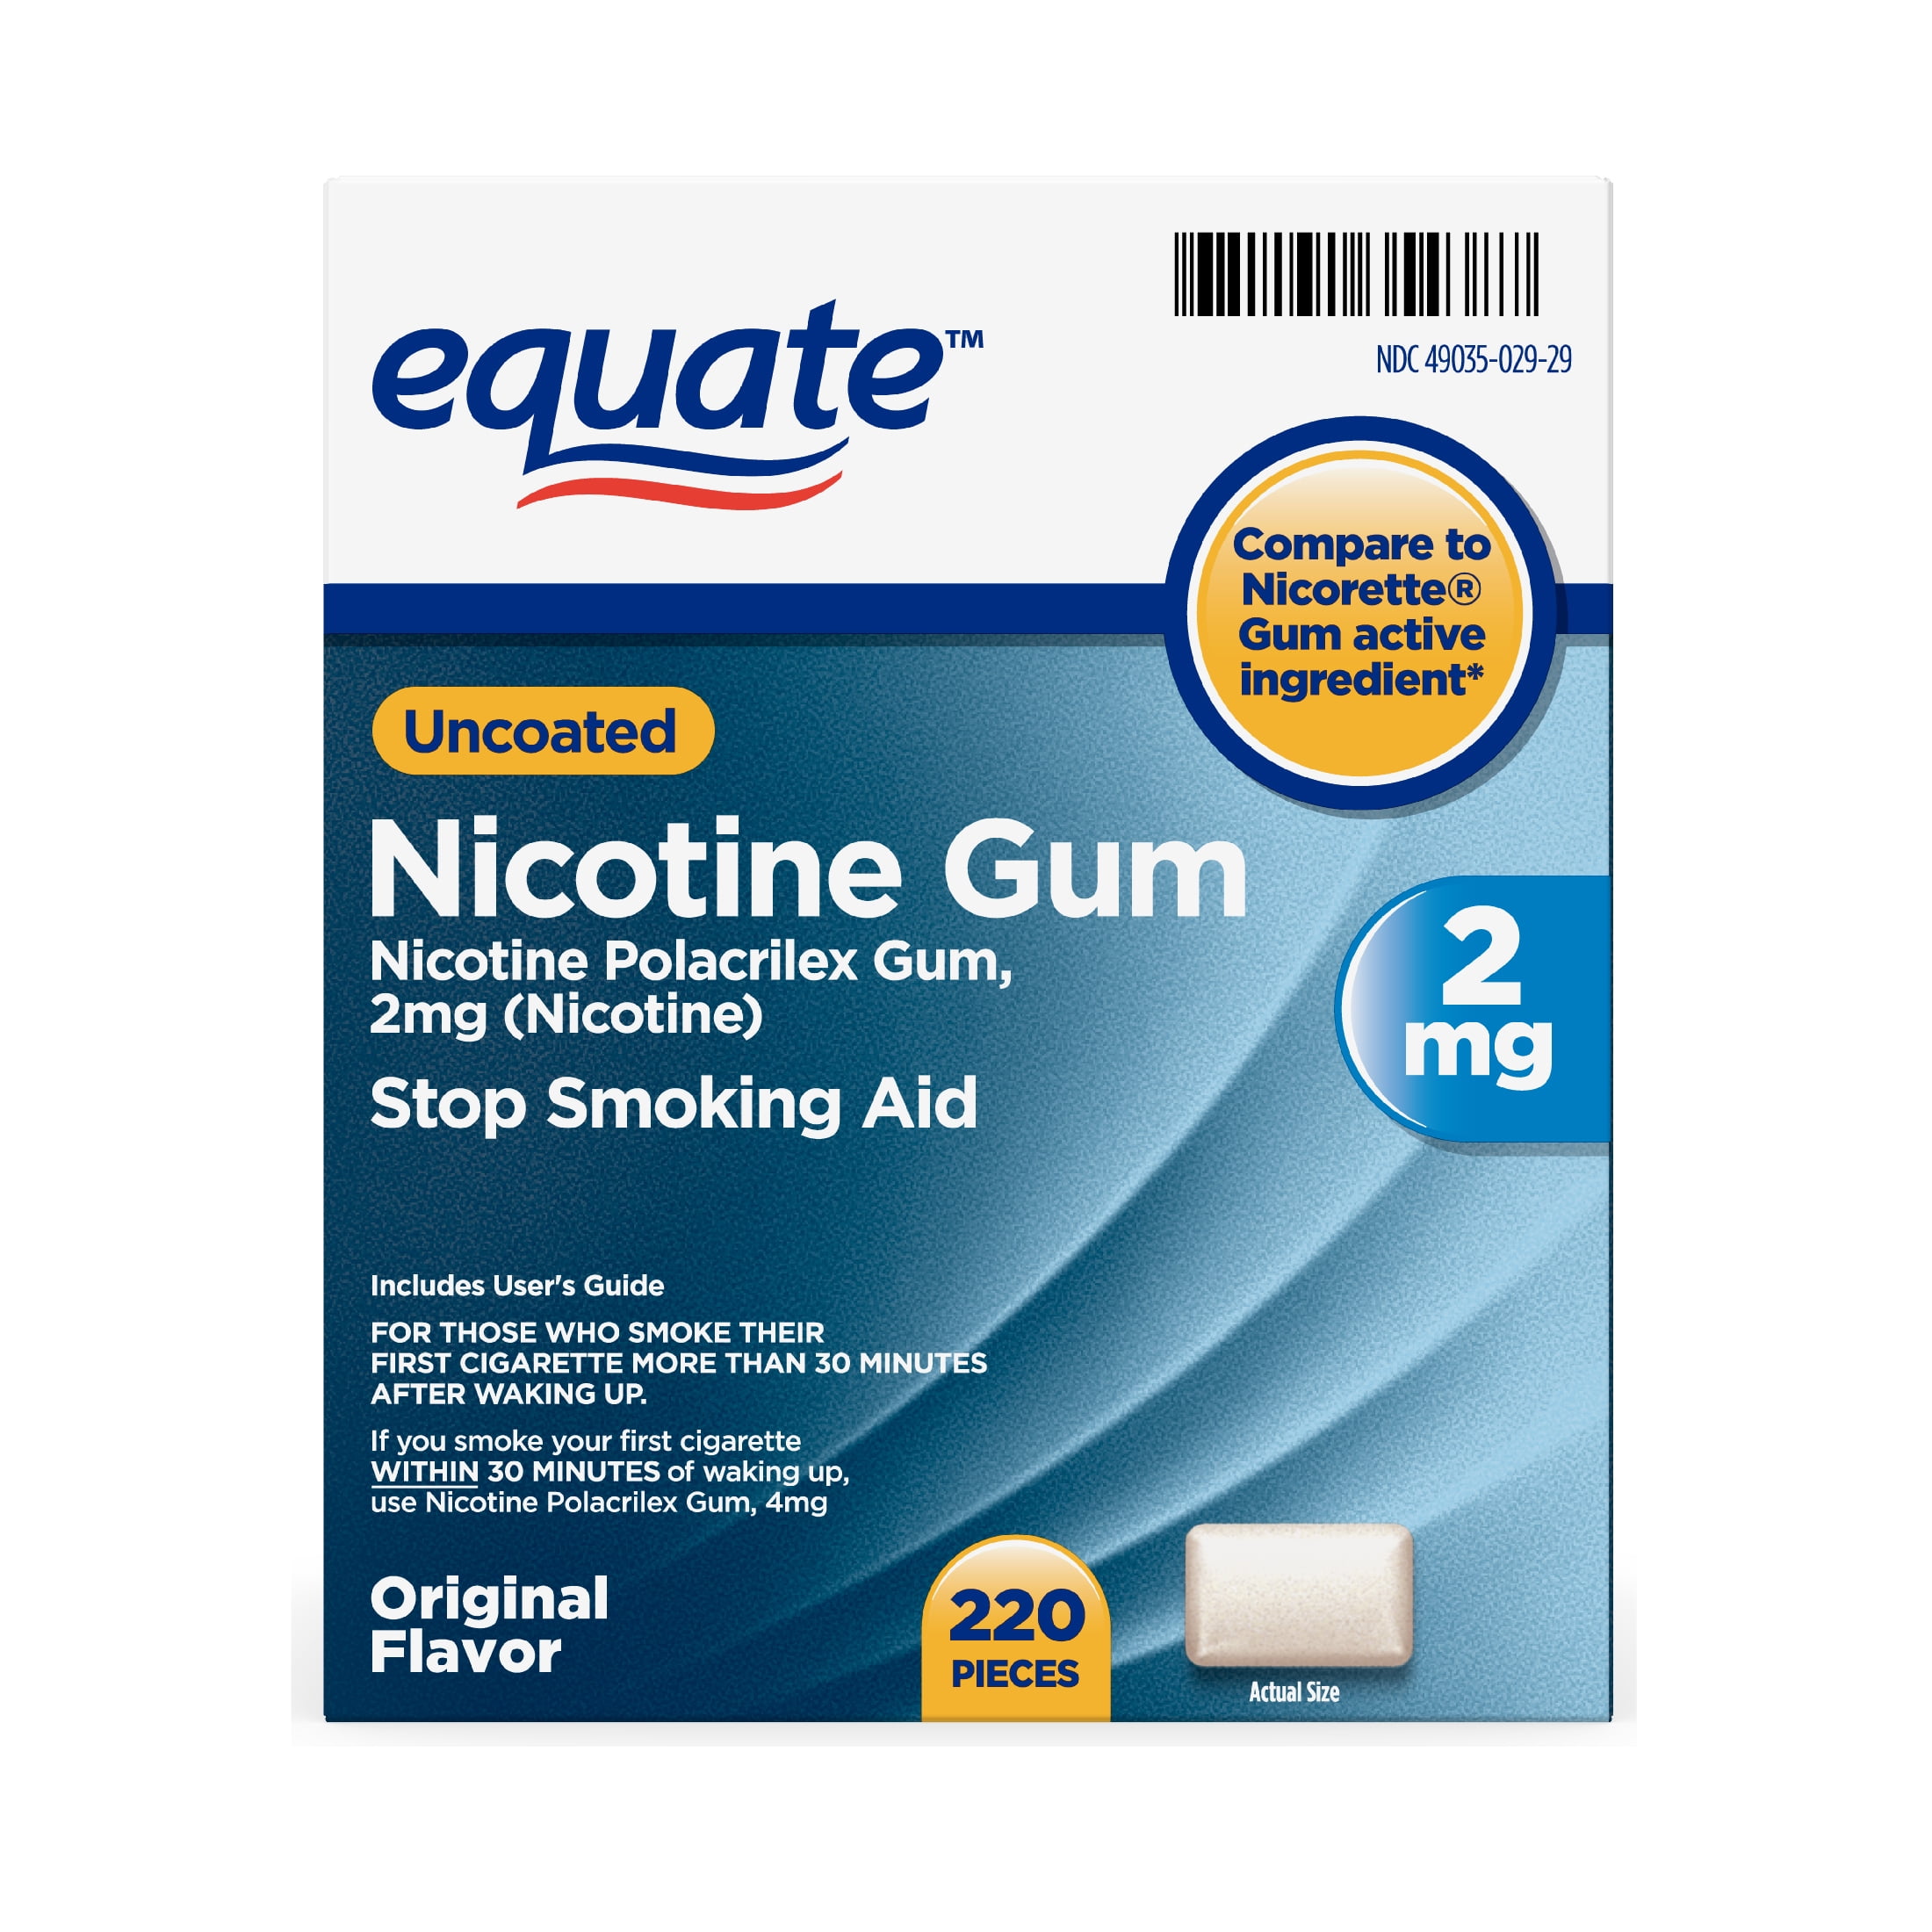 Where is Nicotine Gum in Walmart?